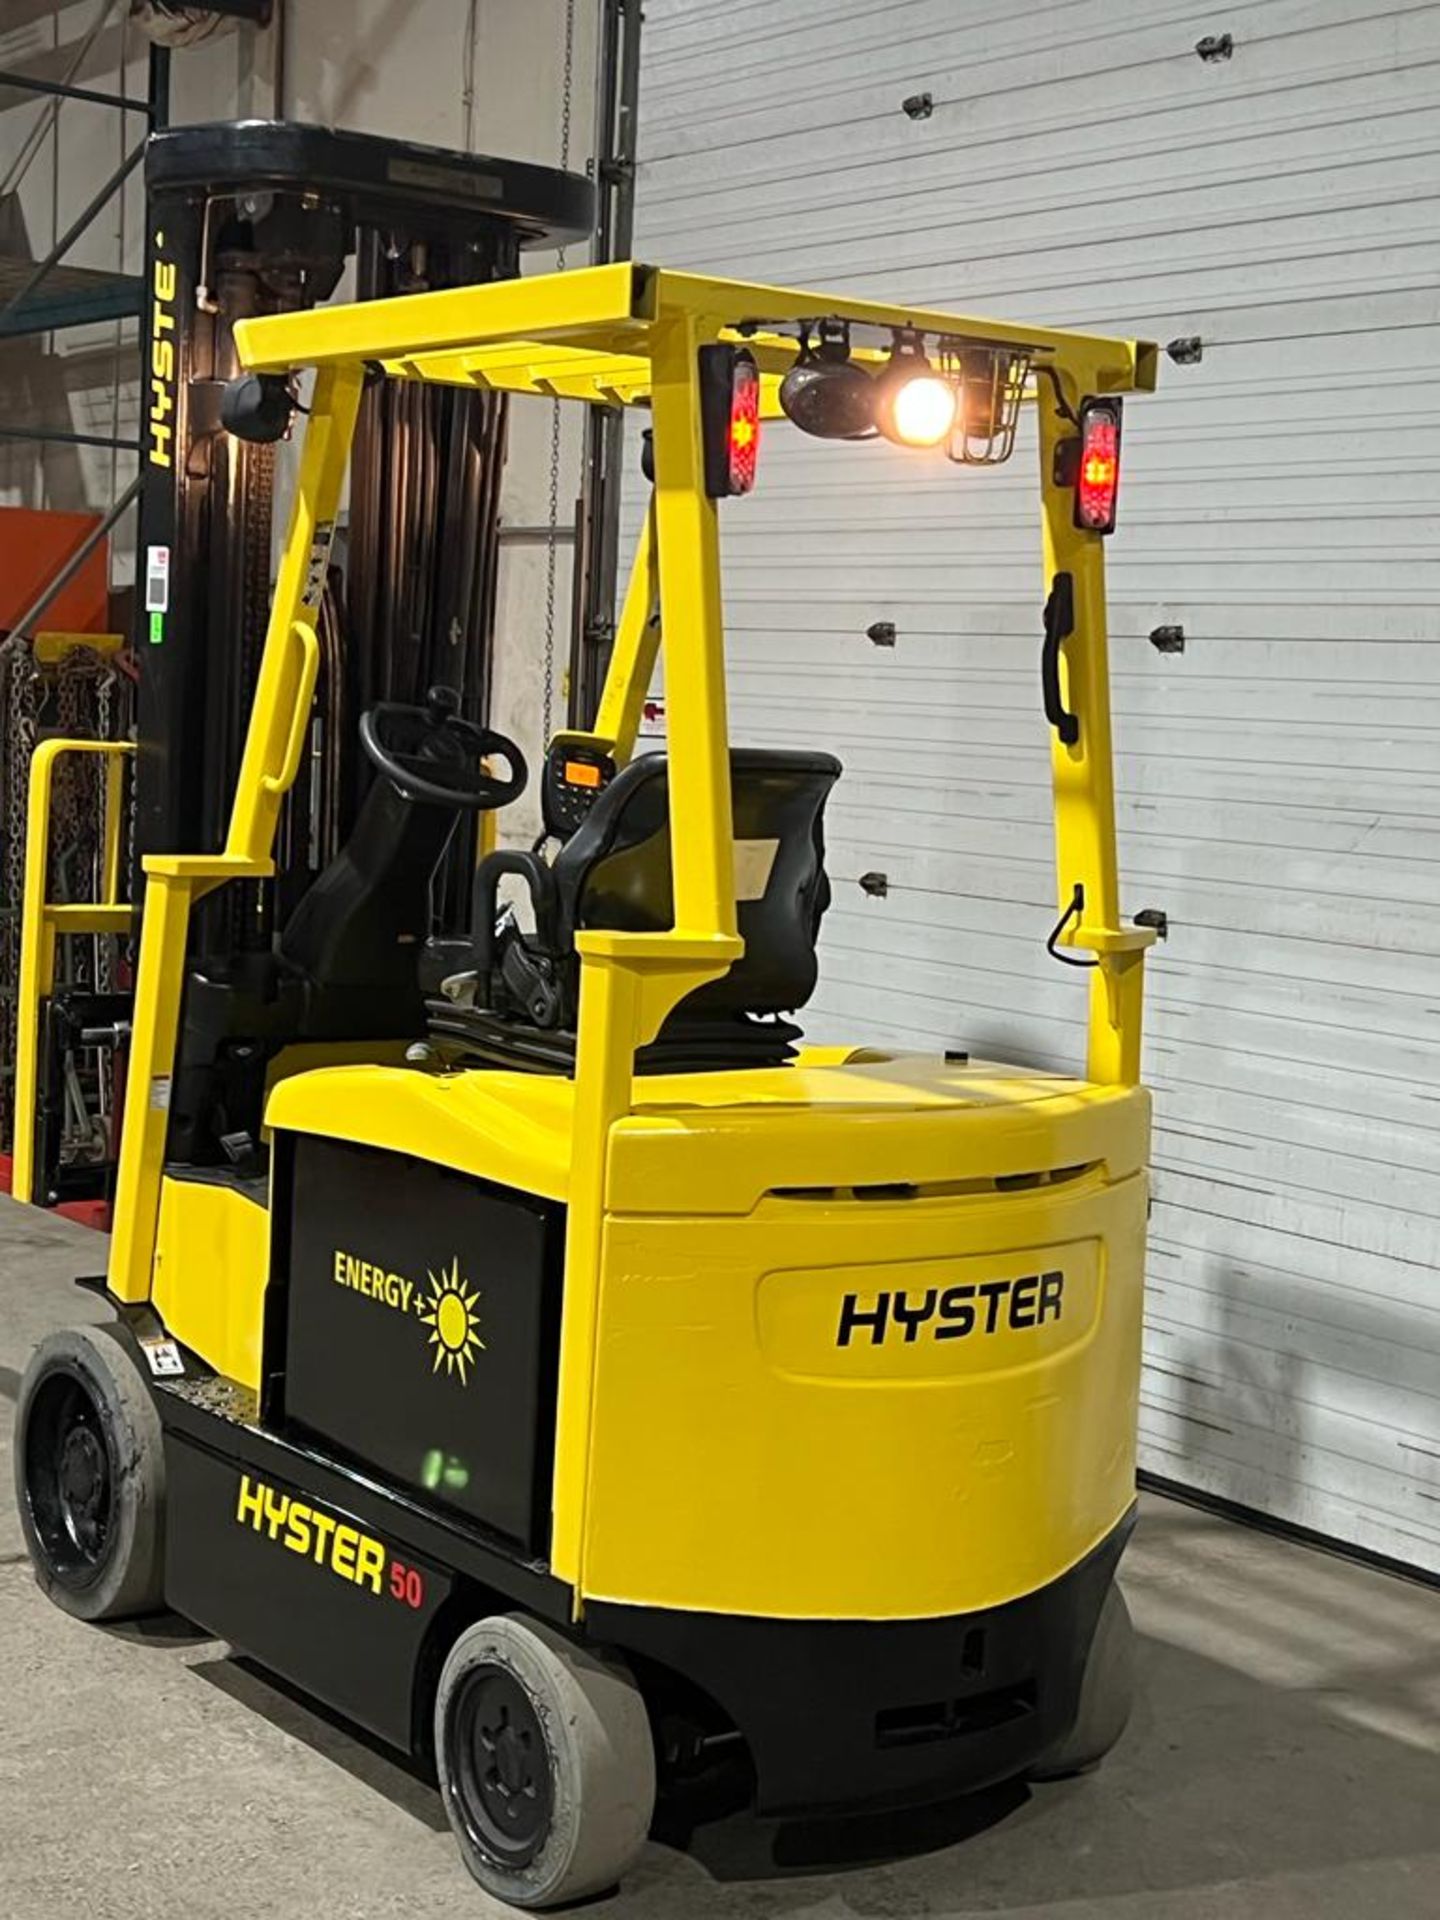 2017 Hyster 5,000lbs Capacity Forklift Electric with 48V Battery & 4-STAGE MAST with Sideshift - Image 5 of 5